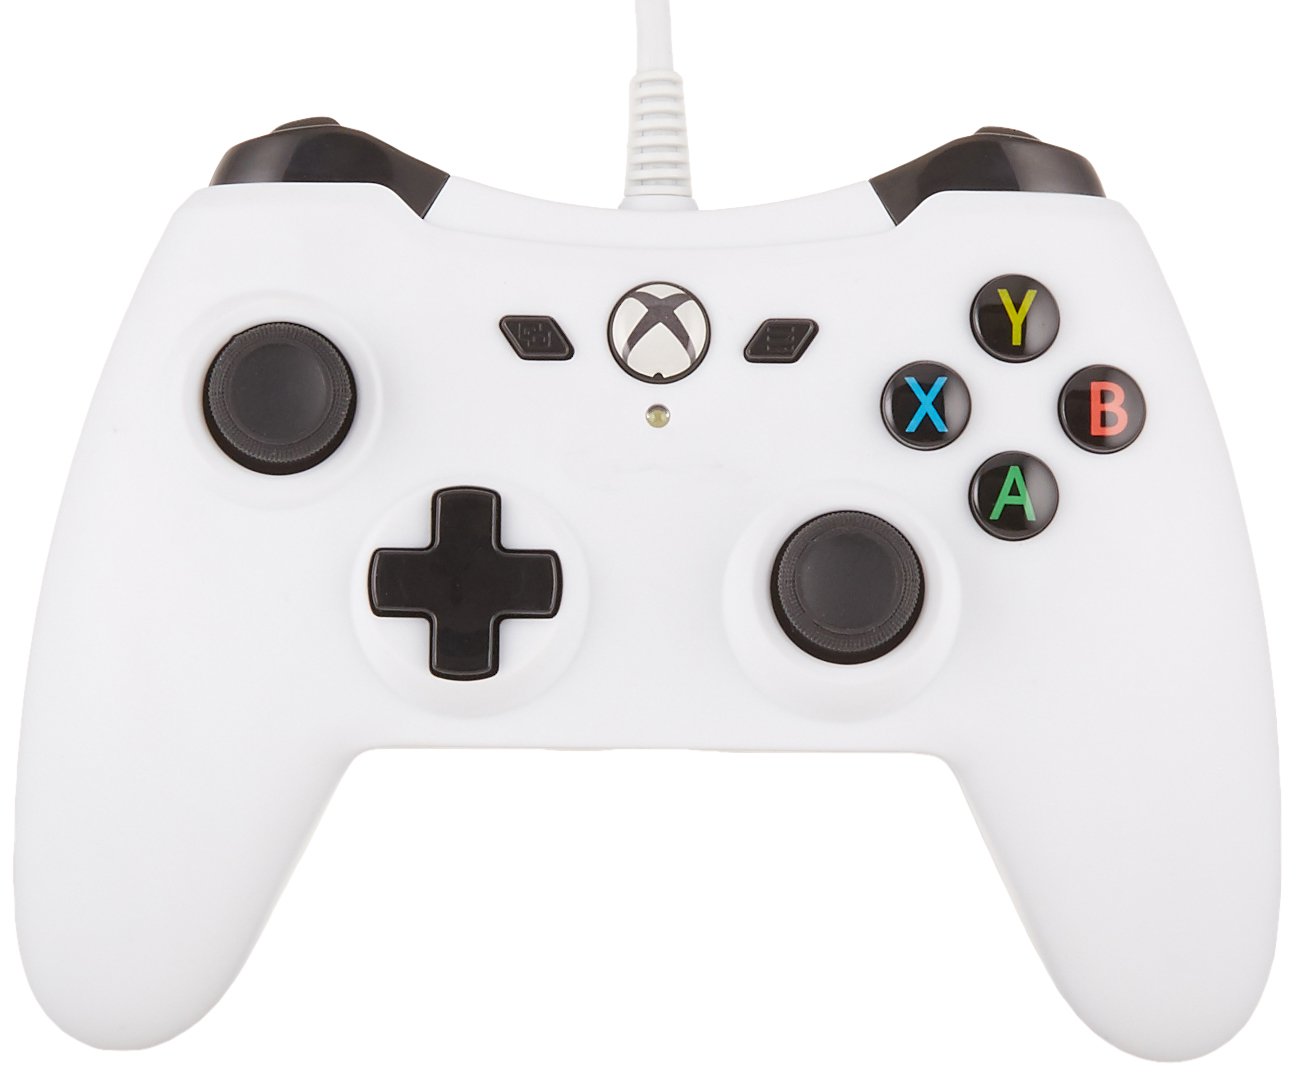 Xbox One controller firmware update prompt